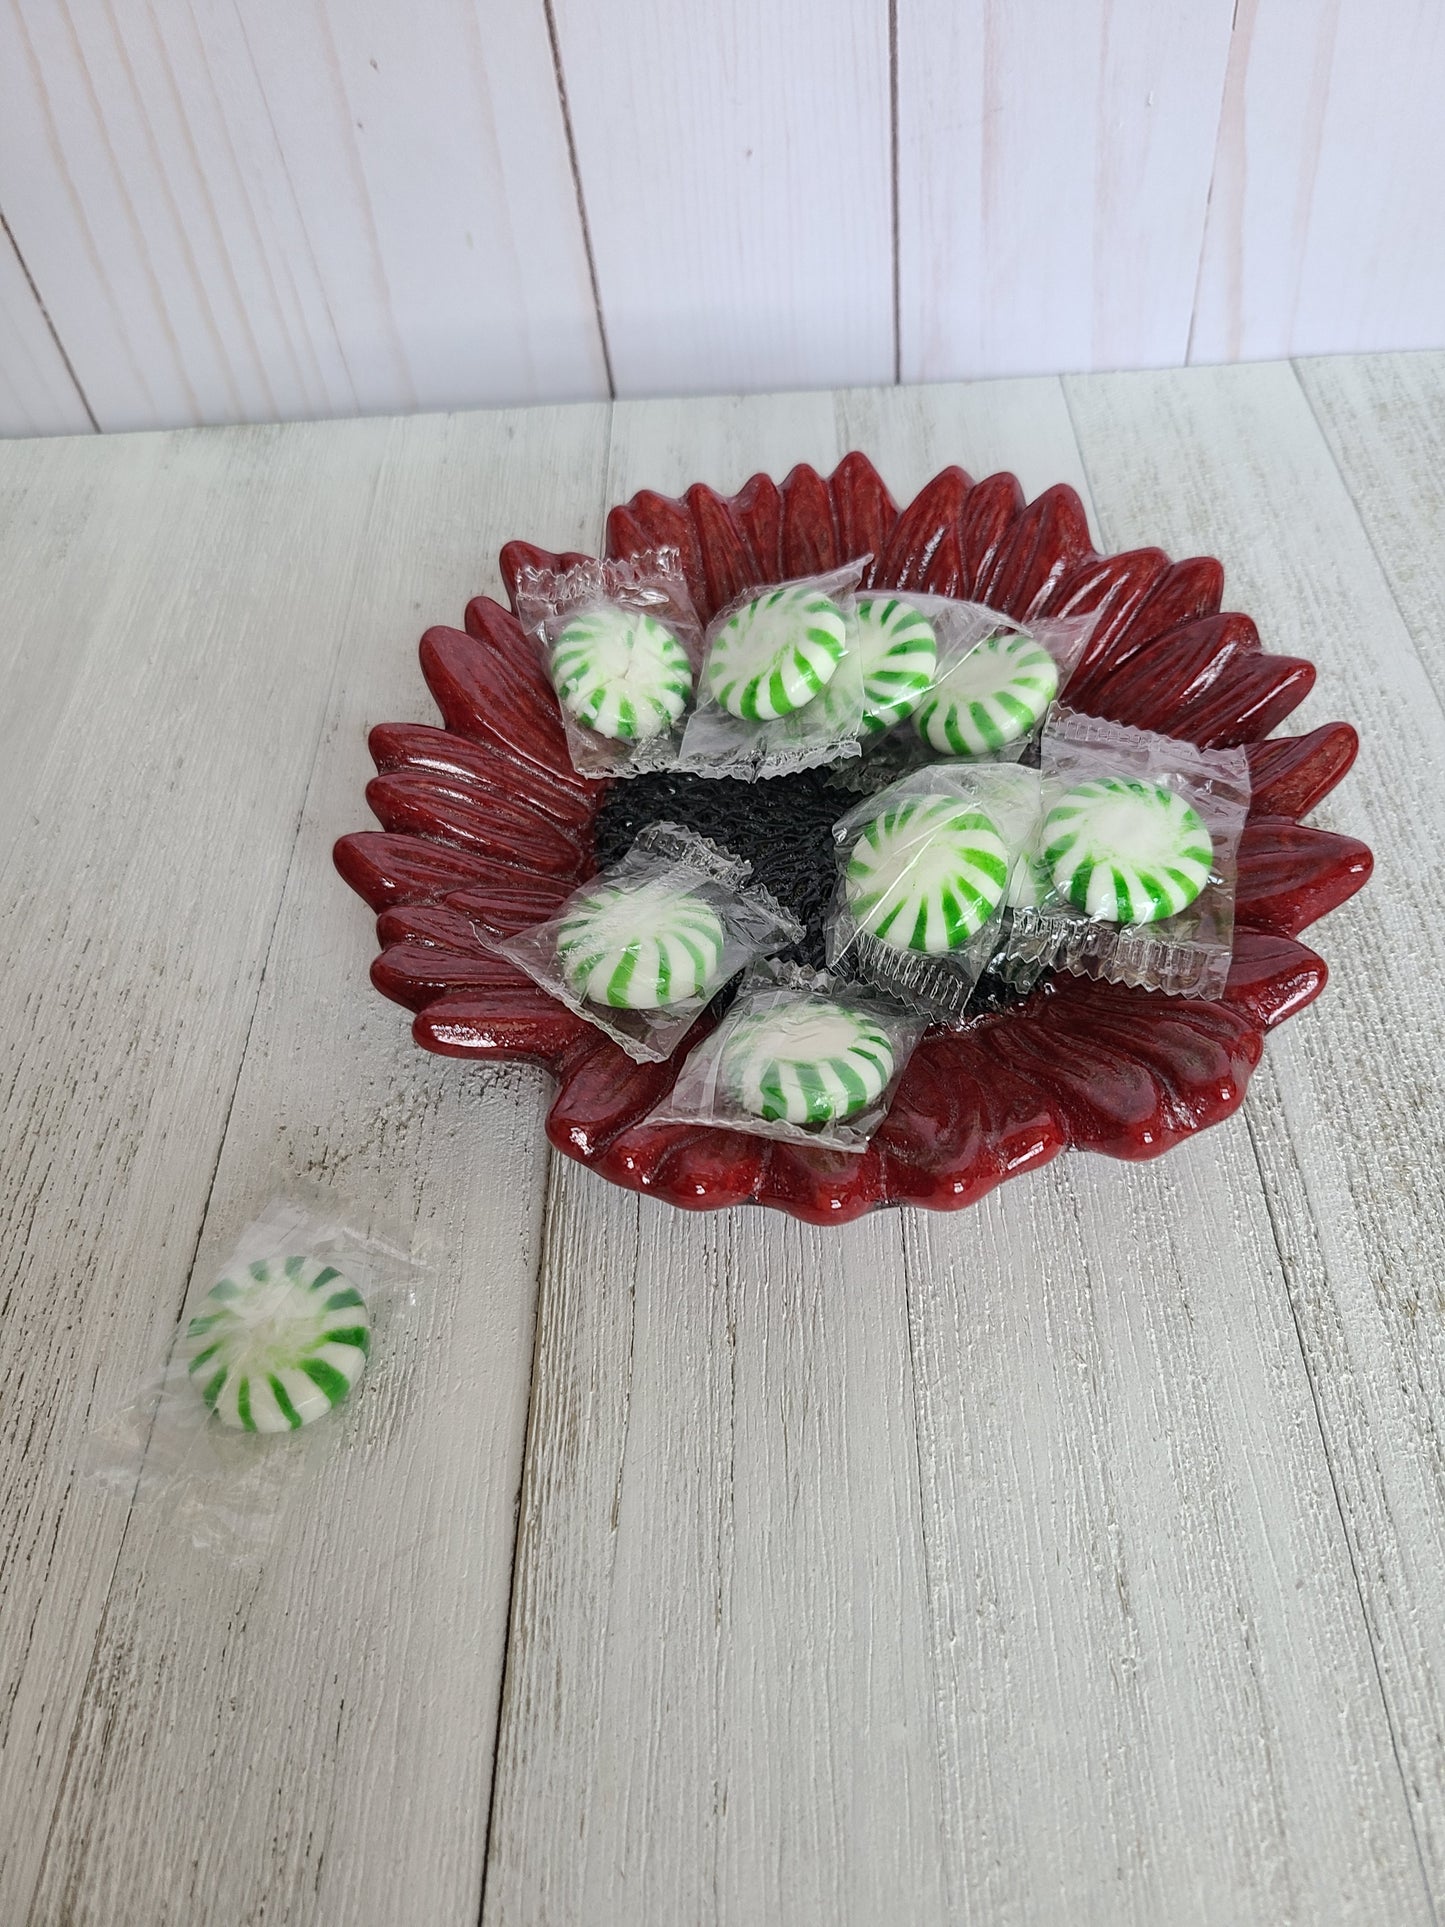 Fused Glass Sunflower Dish, Red Sunflower